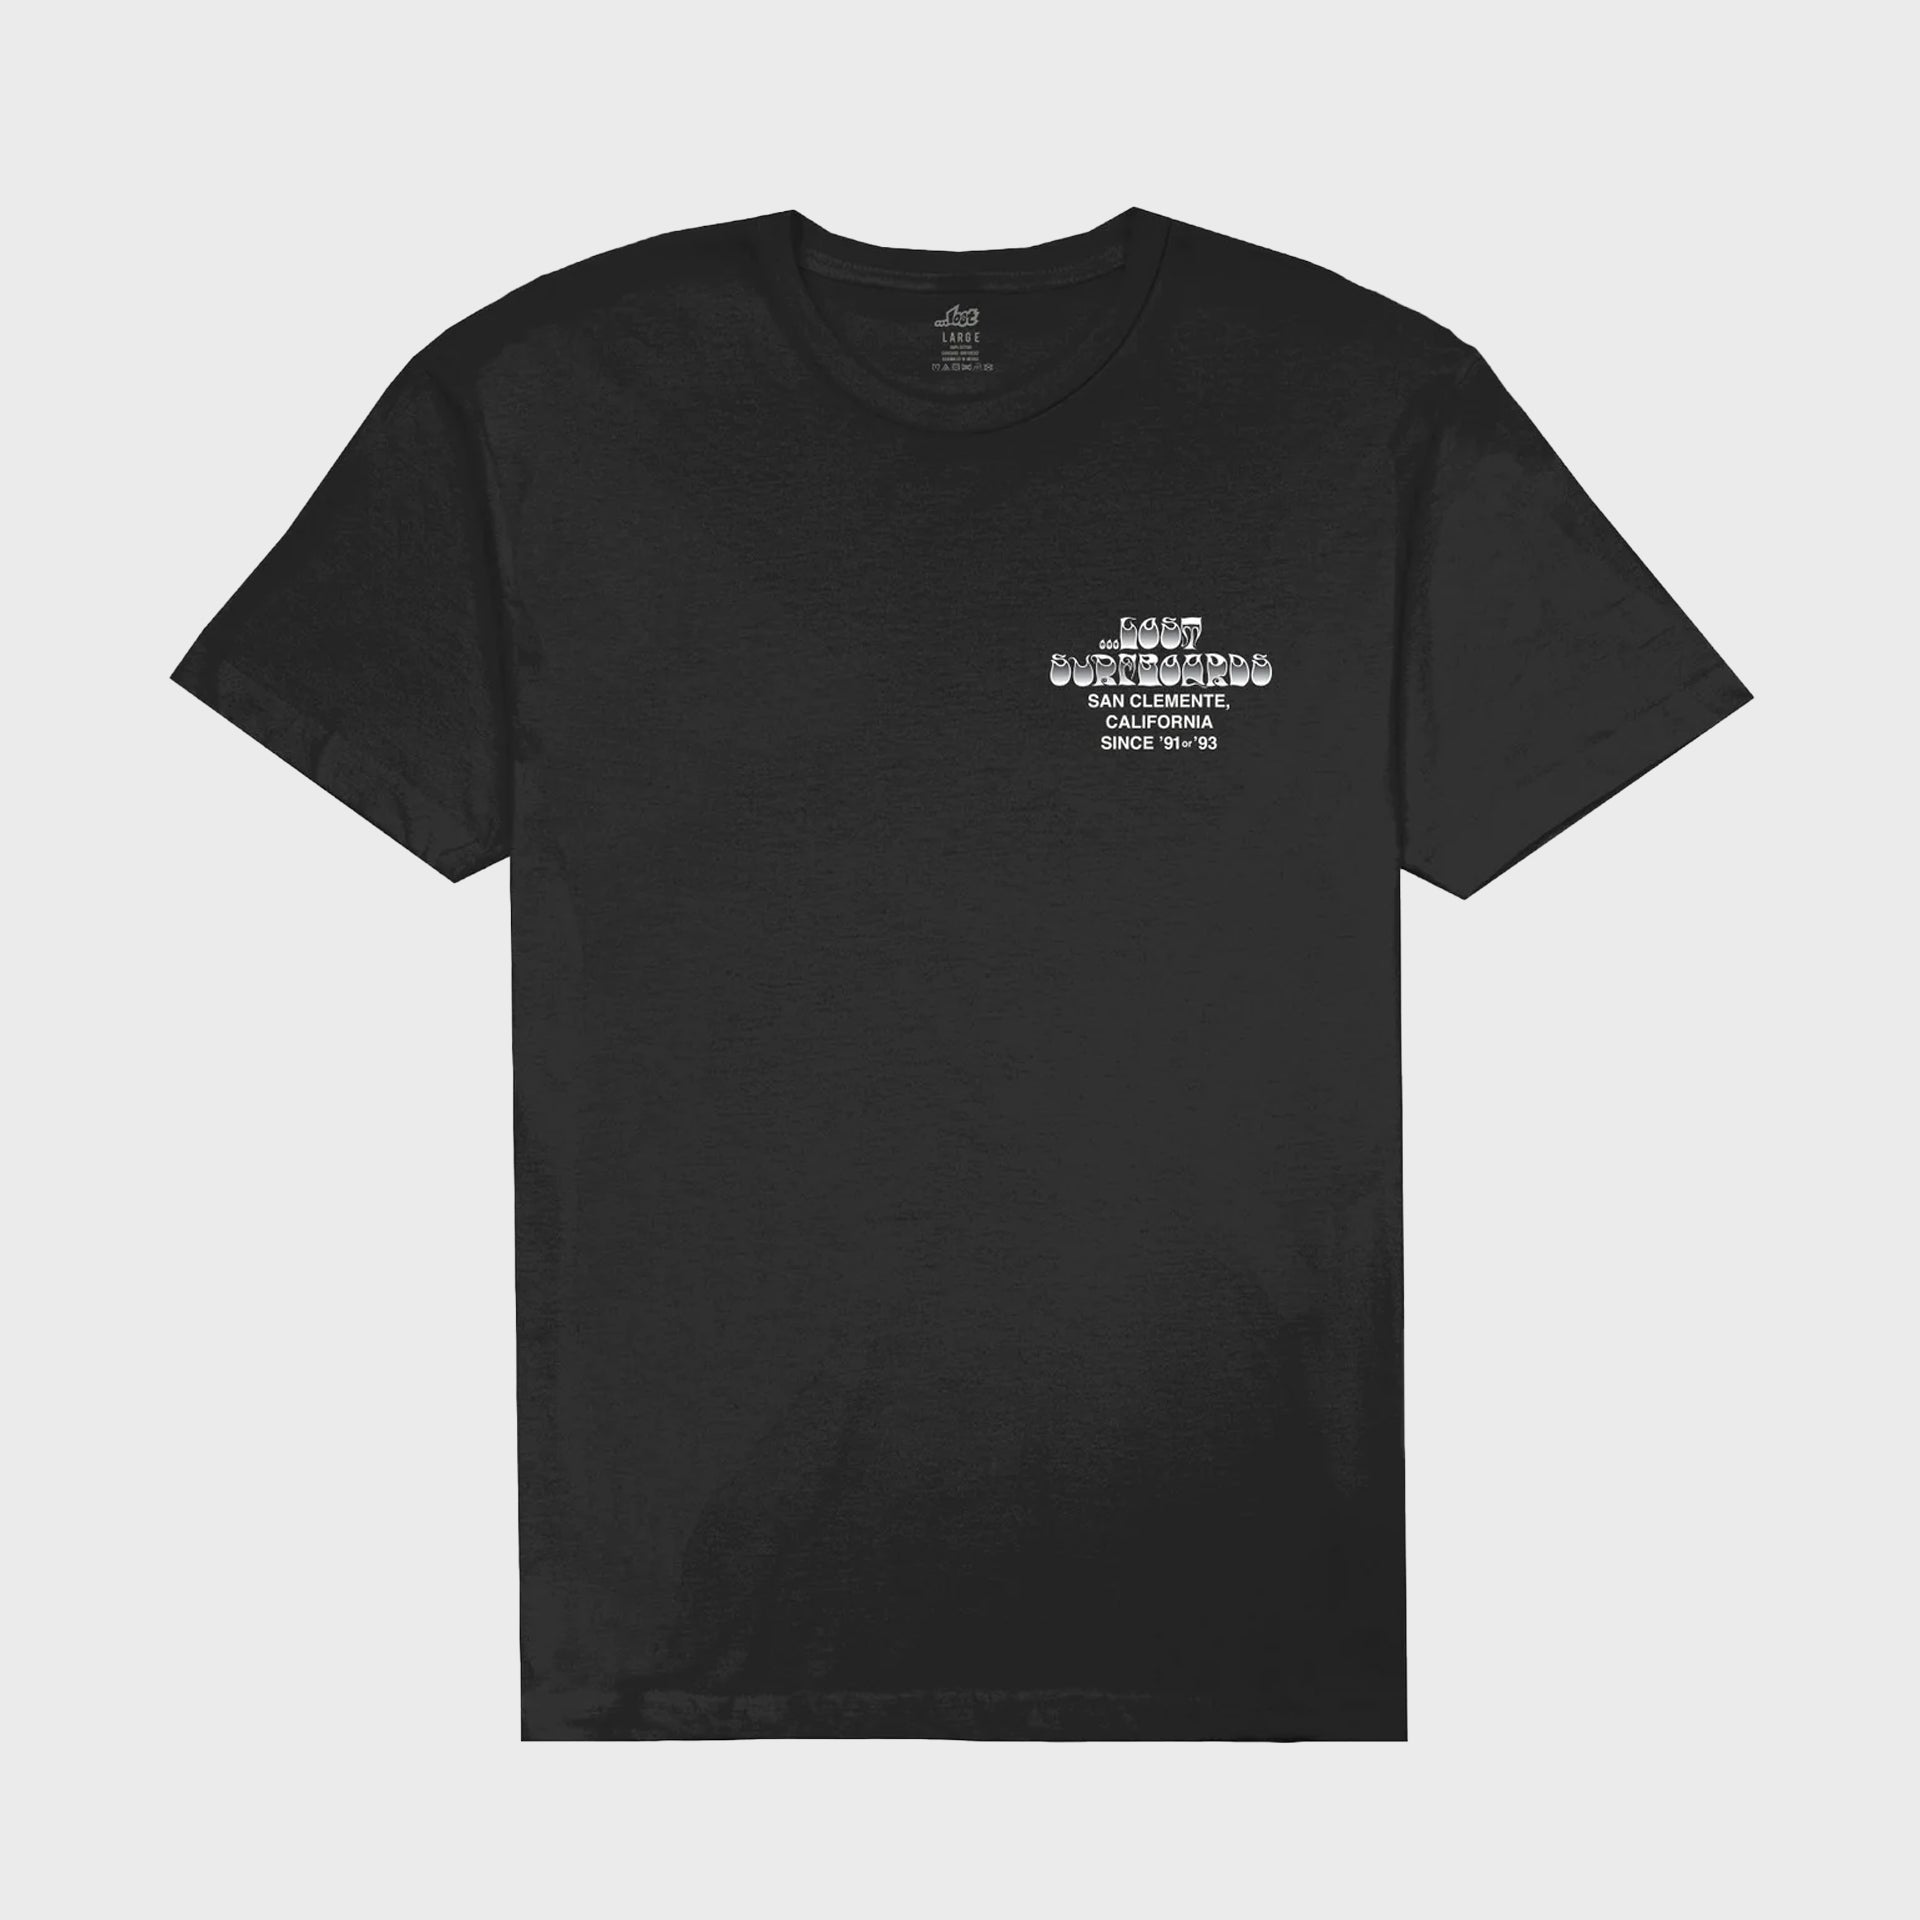 Lost Posted Mens T-Shirt - Black - ManGo Surfing